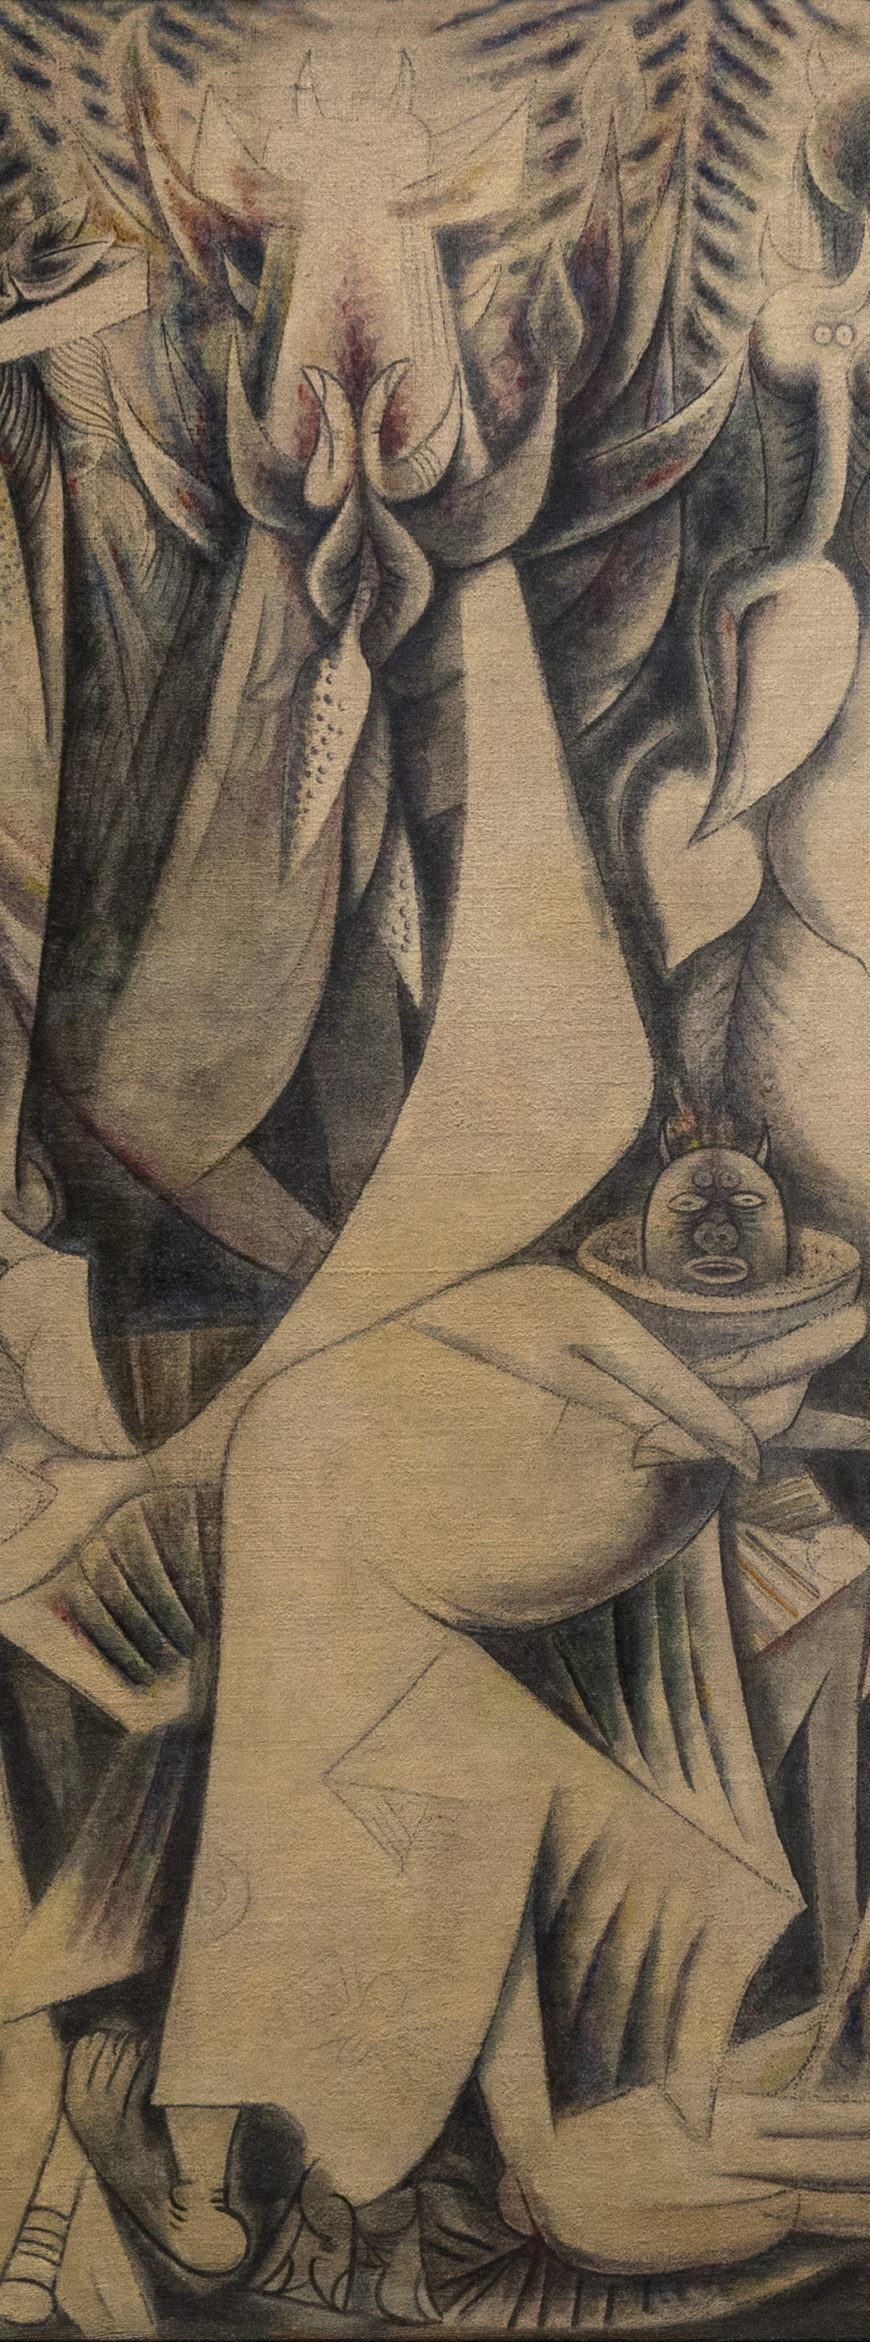 Wifredo Lam, The Eternal Presence (An Homage to Alejandro García Caturla), detail, 1944, oil and pastel over papier mâché and chalk ground on bast fiber fabric, 85 1/4 x 77 1/8 inches (Rhode Island School of Design Museum; photo: Steven Zucker, CC BY-NC-SA 2.0)